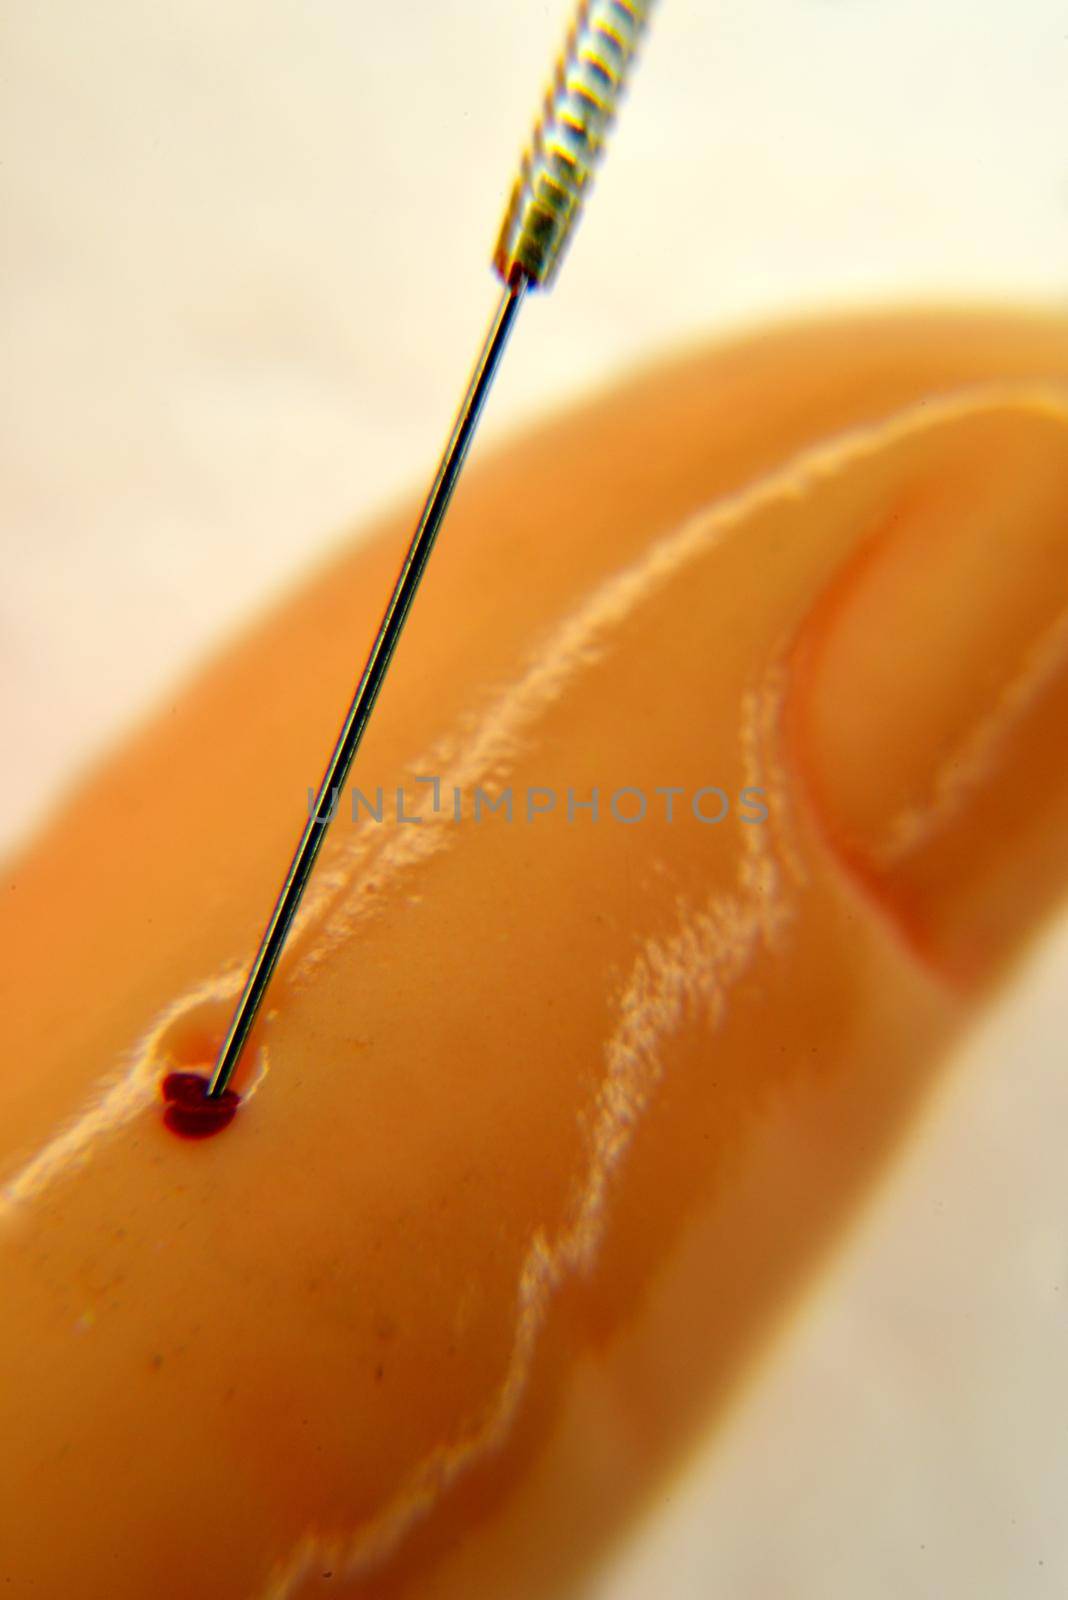 acupuncture demonstration on hand model by Jochen